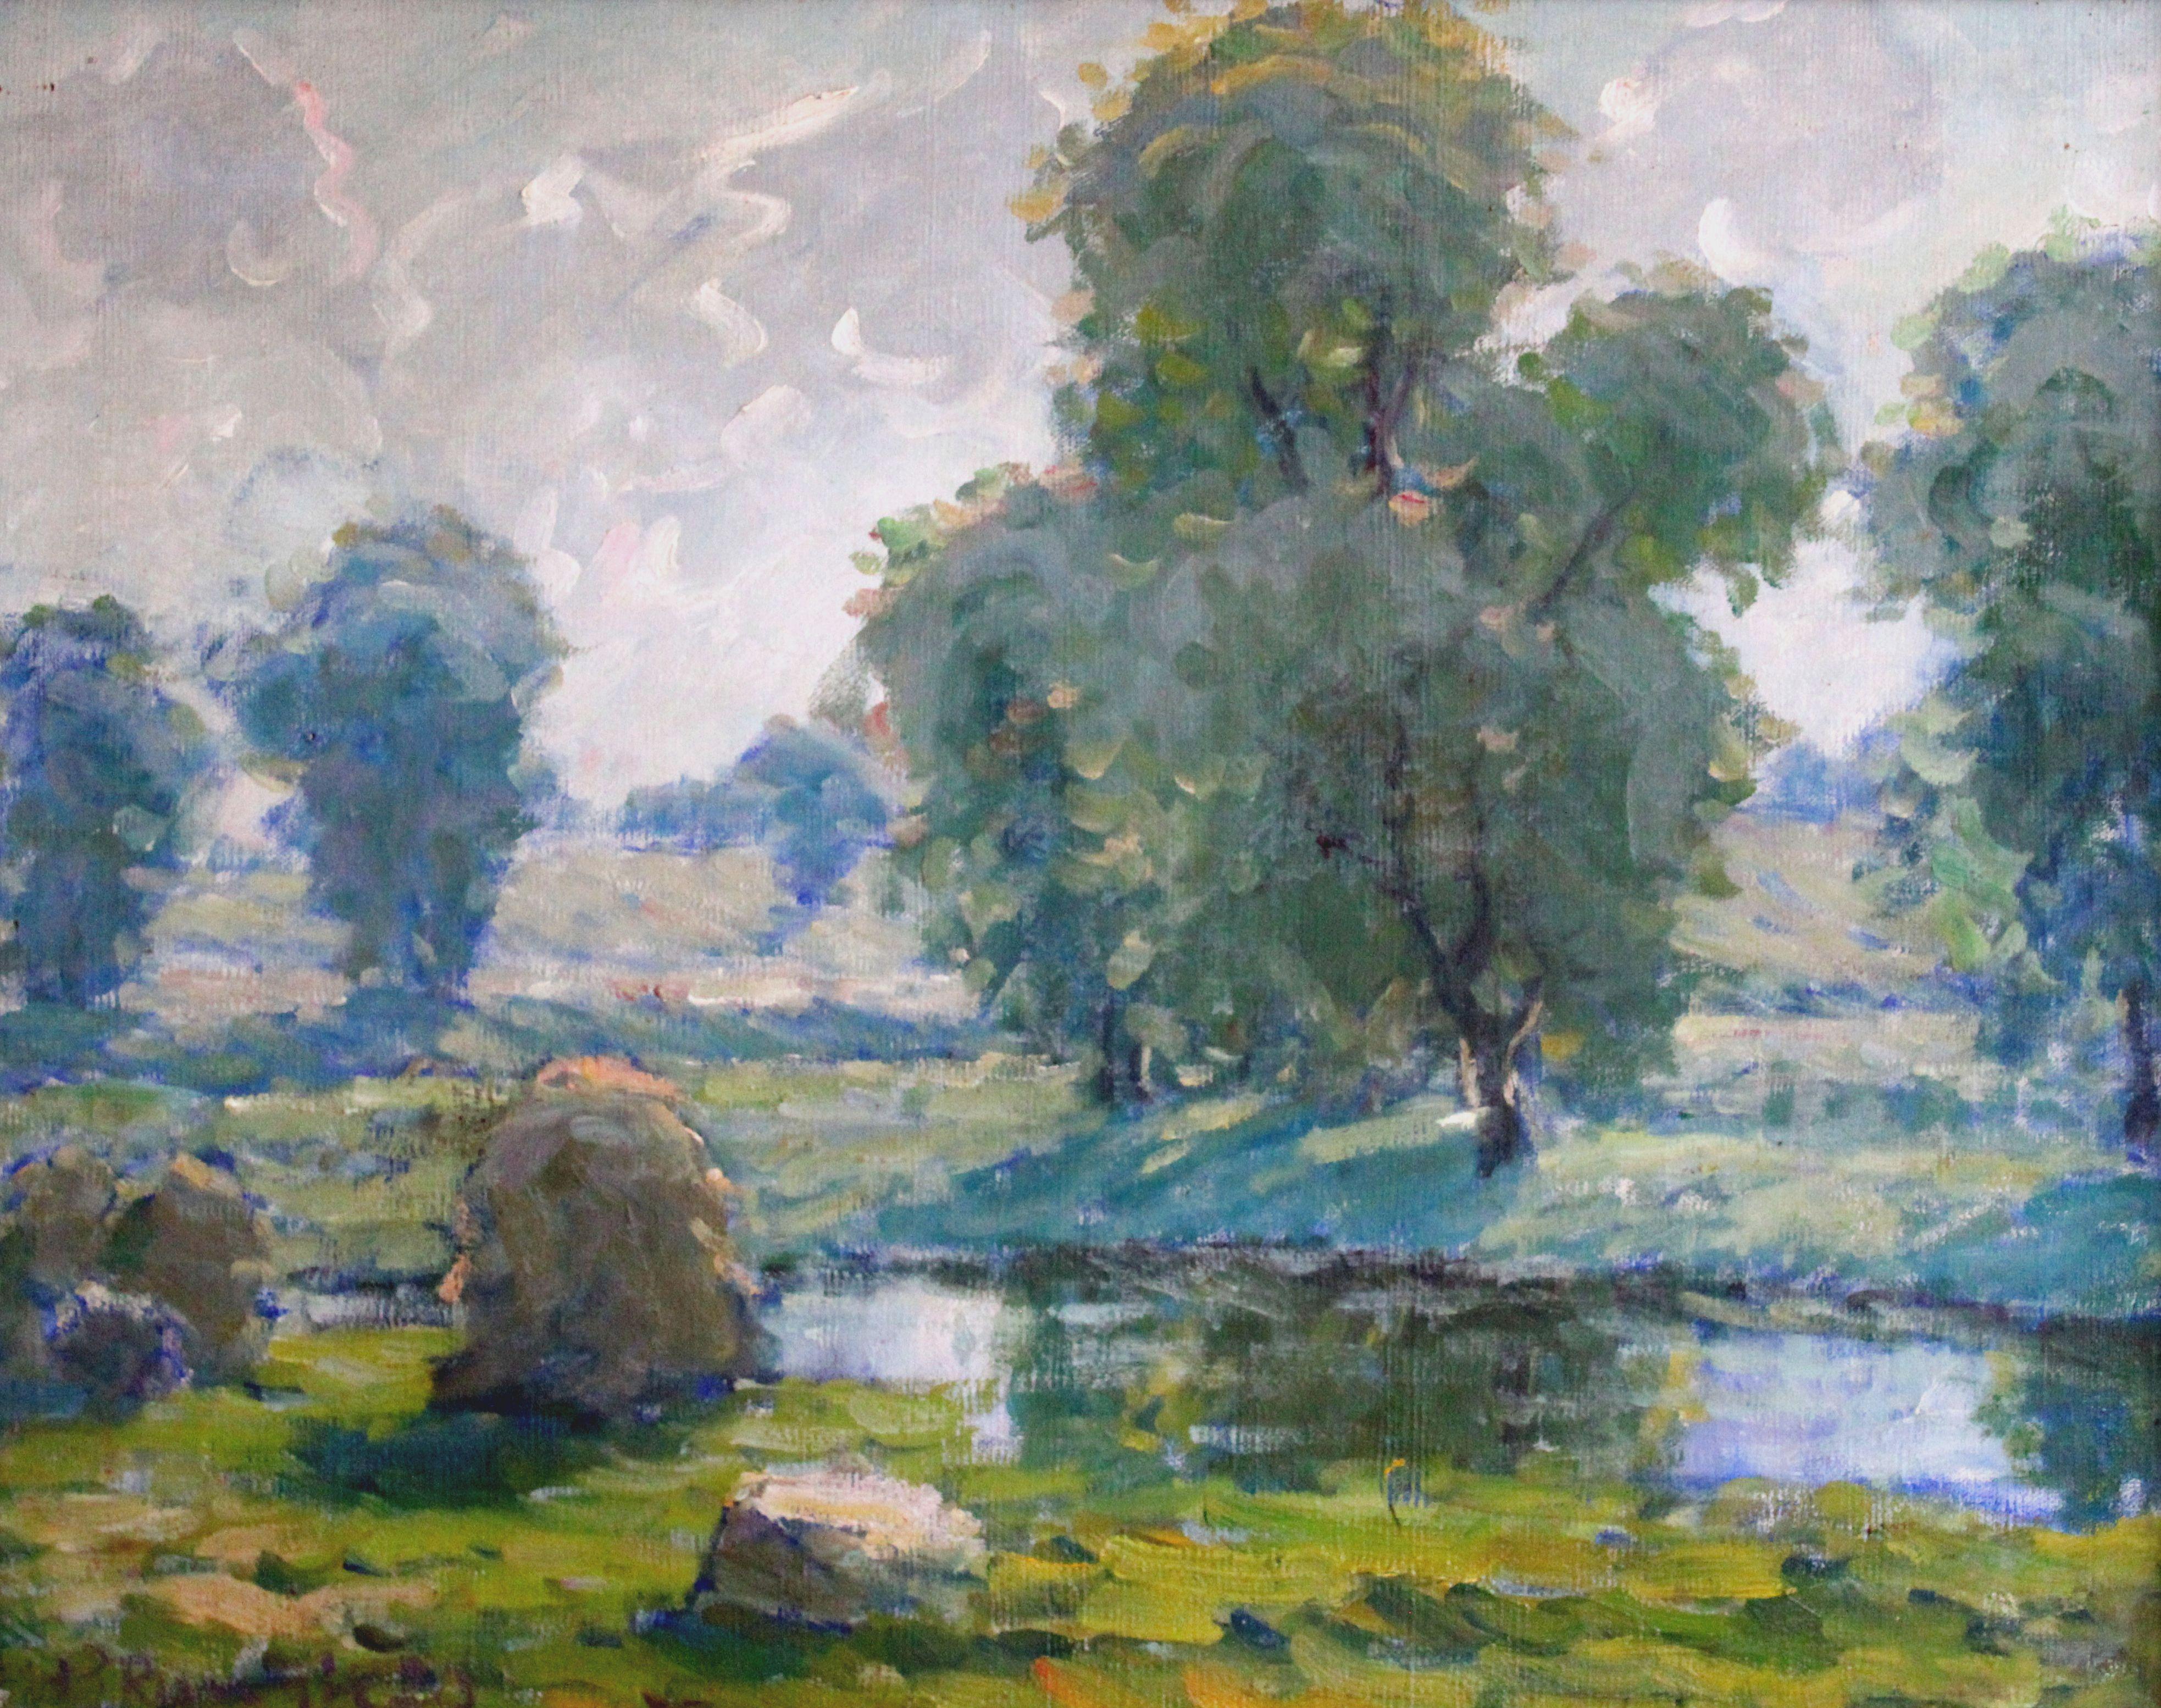 Summer day. Oil on canvas, 69x54 cm - Painting by Peteris Rungis 